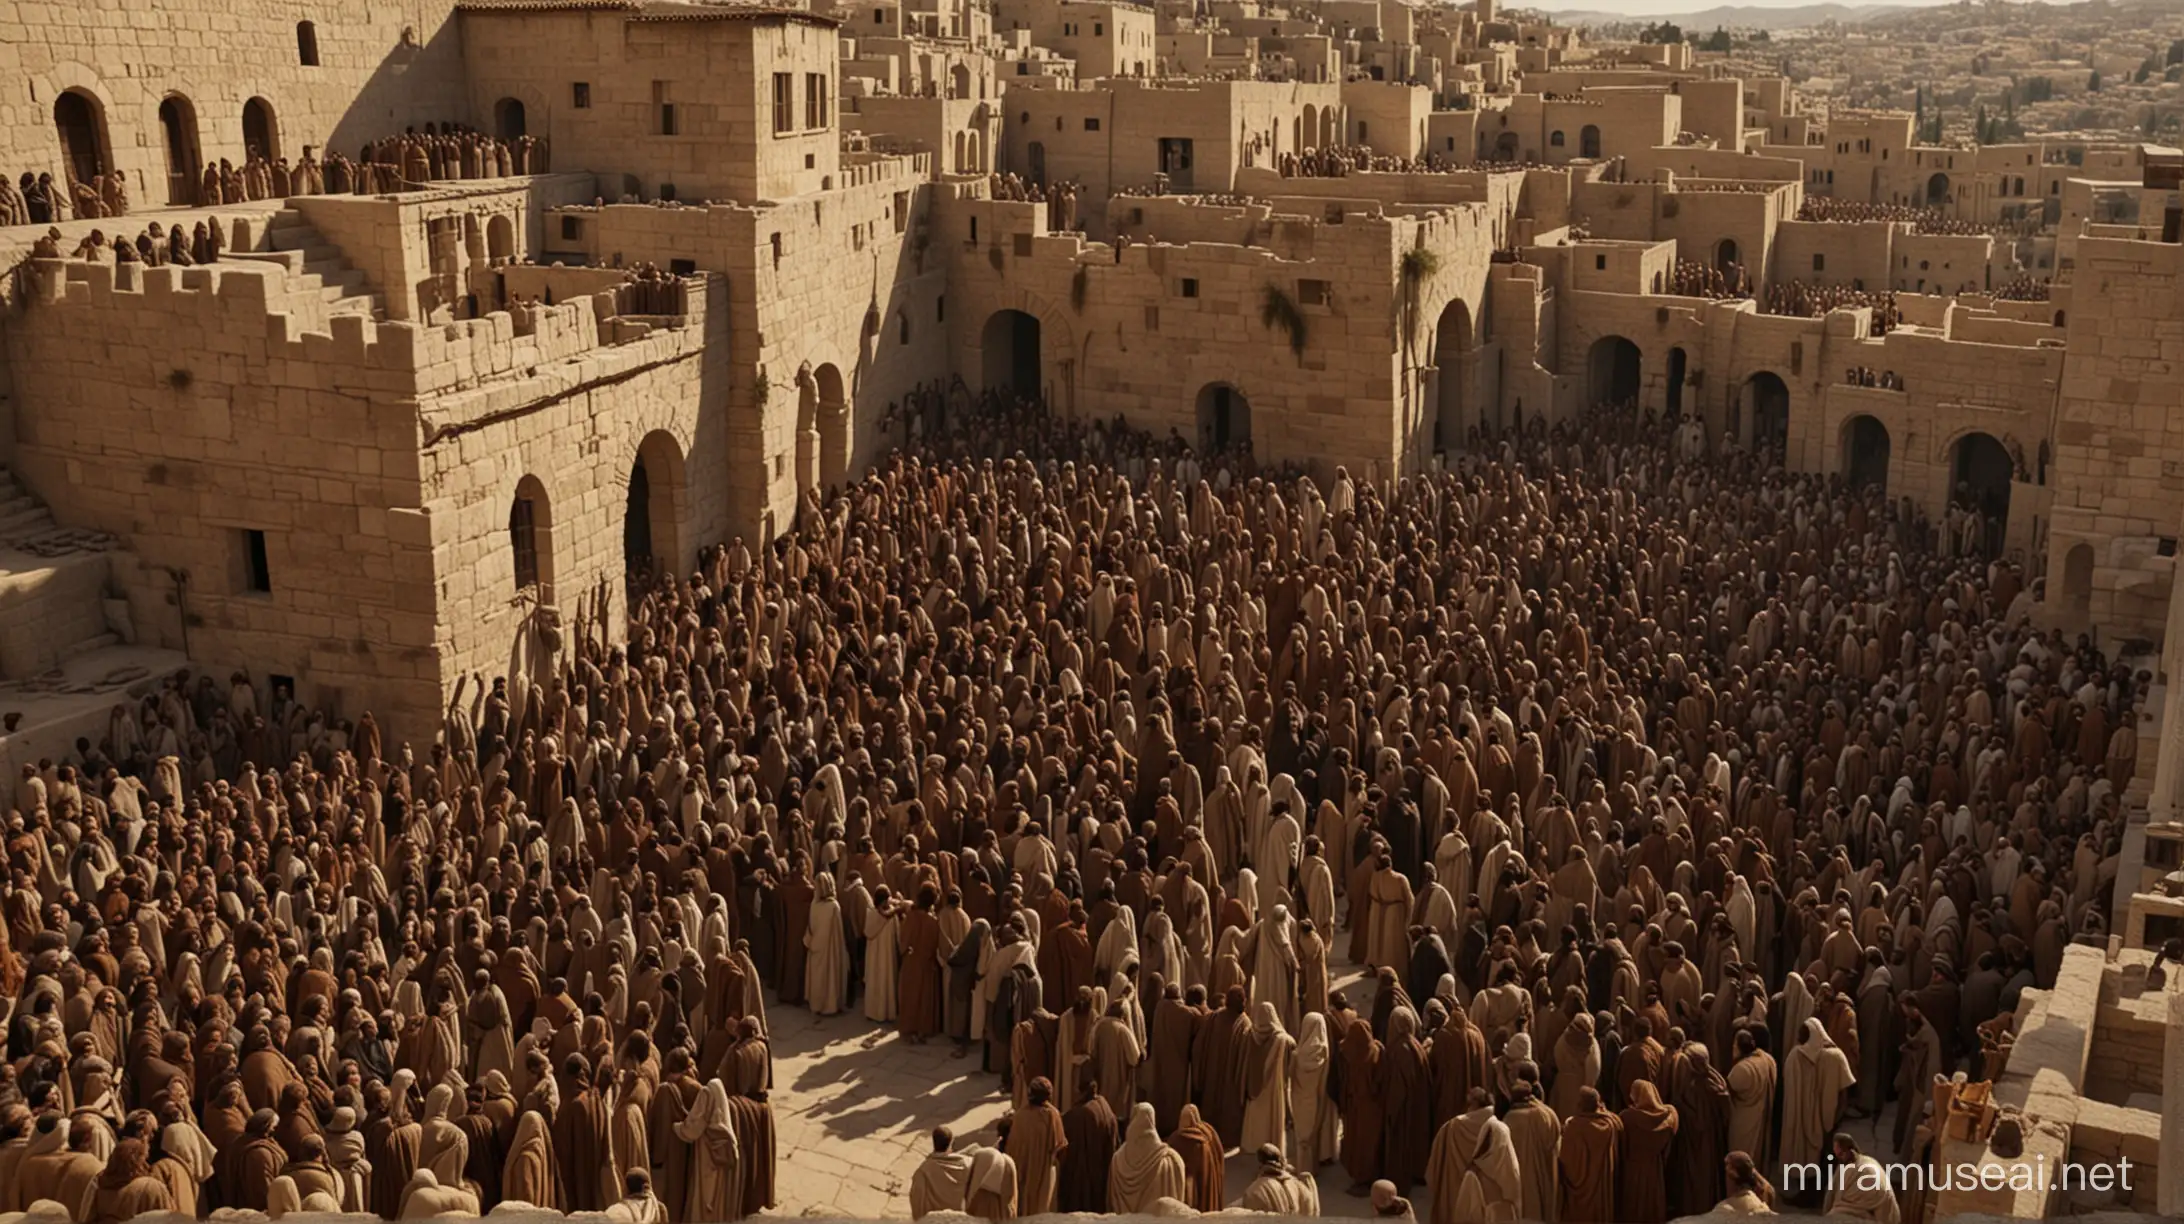 create image of Jesus in a 1st century Jerusalem house, gathered with his followers. 6k resolution, more realistic, based on the movie The Passion of the Christ.